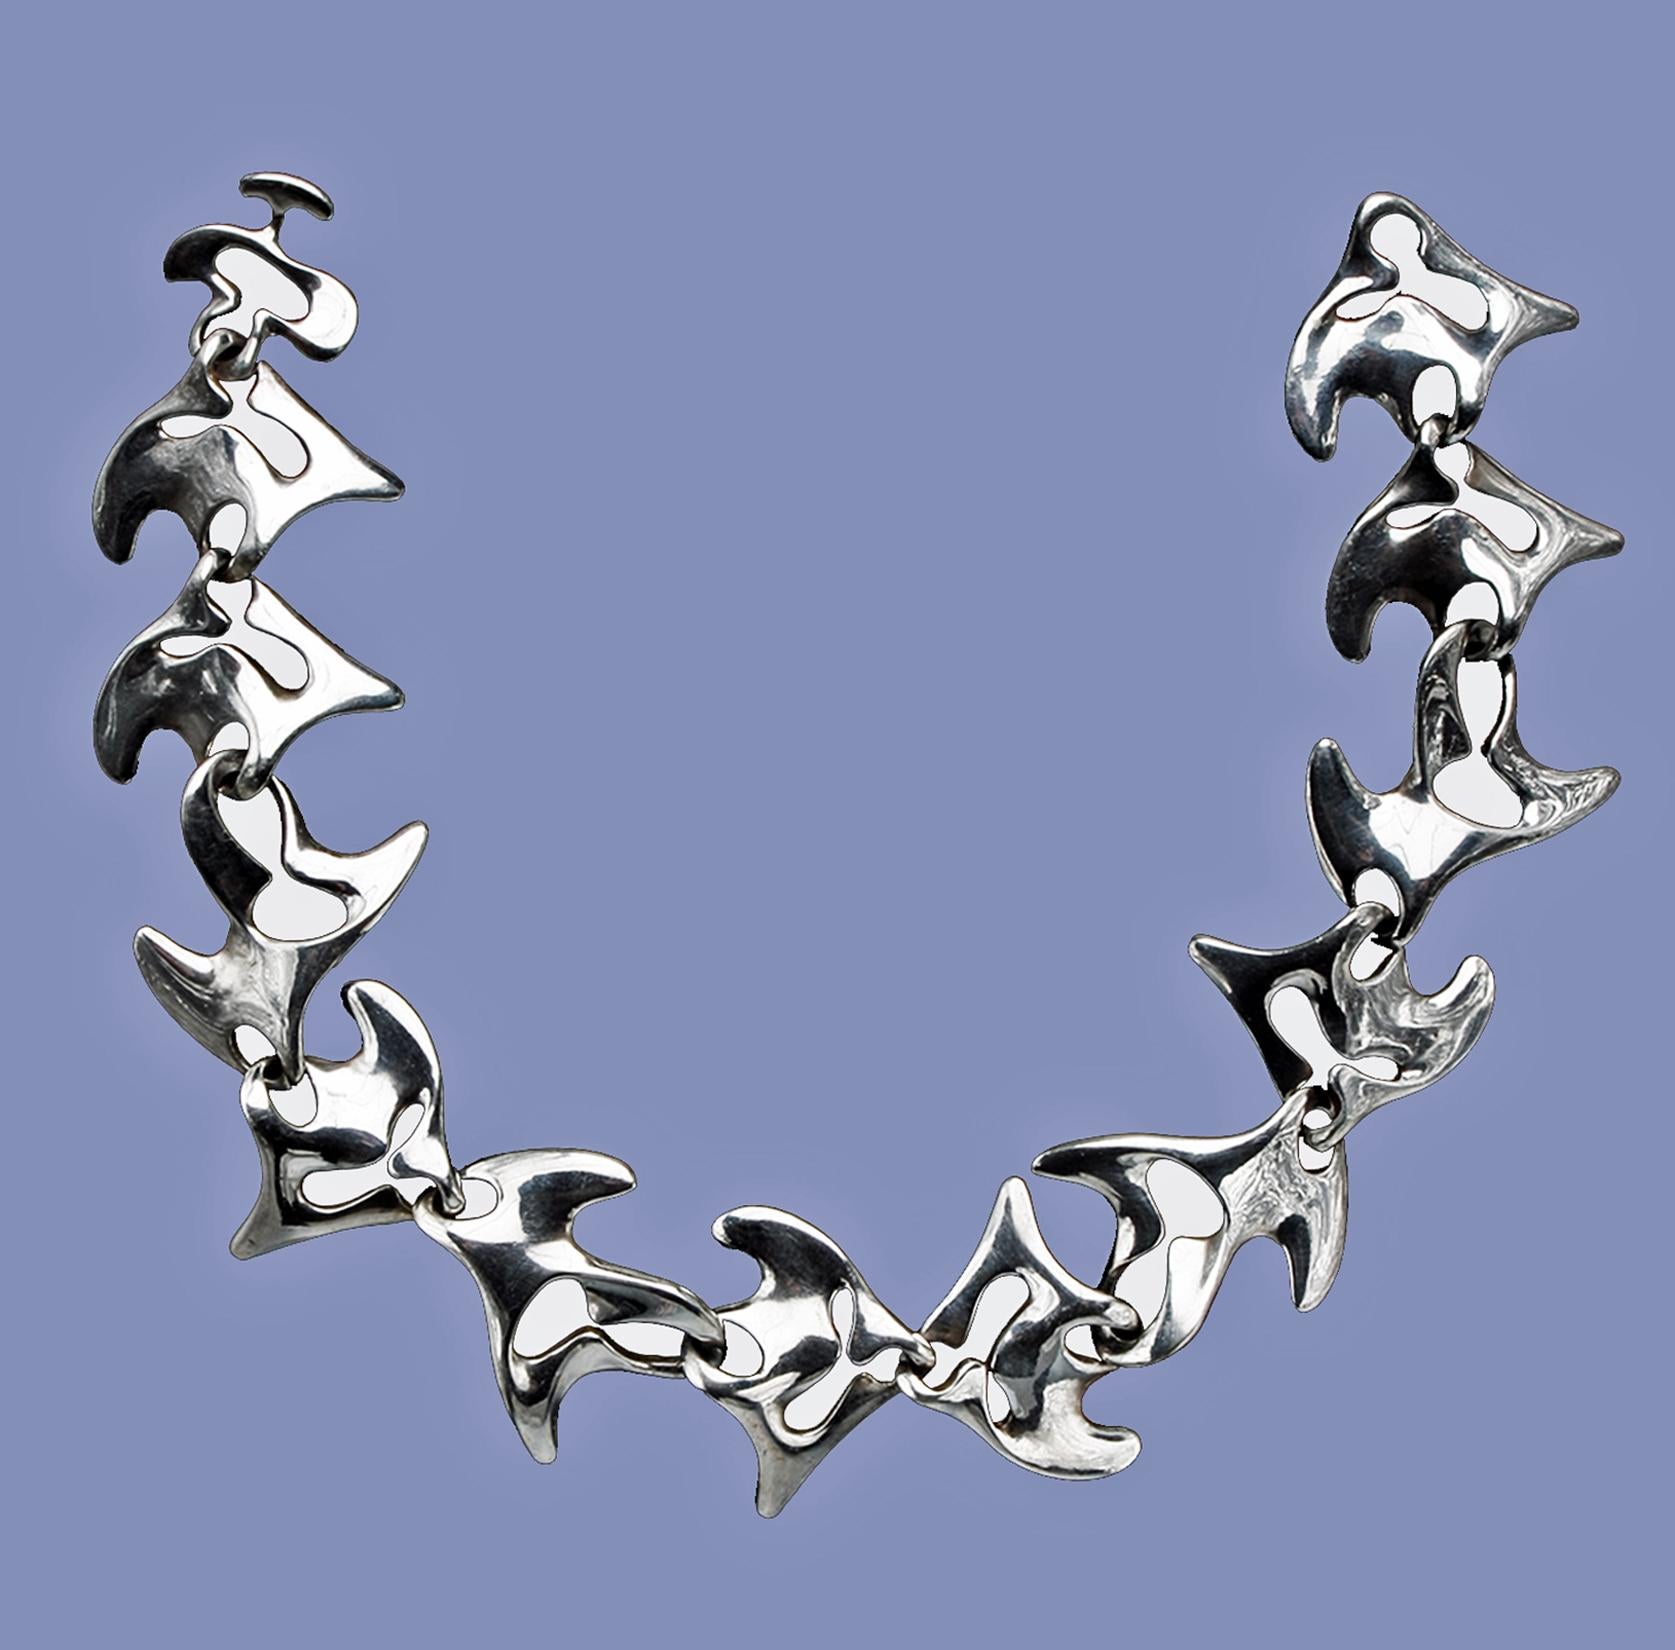 Georg Jensen Sterling Silver Necklace, Amoeba #89. Designed by Henning Koppel 1918 - 1981. Stamped with post 1945 Hallmarks dotted oval Georg Jensen, Sterling, Denmark, 89. Width: 4.5 cm. 1.8 inches. L. 43.18 cm. 17.0 inches. Item Weight: 257 grams.